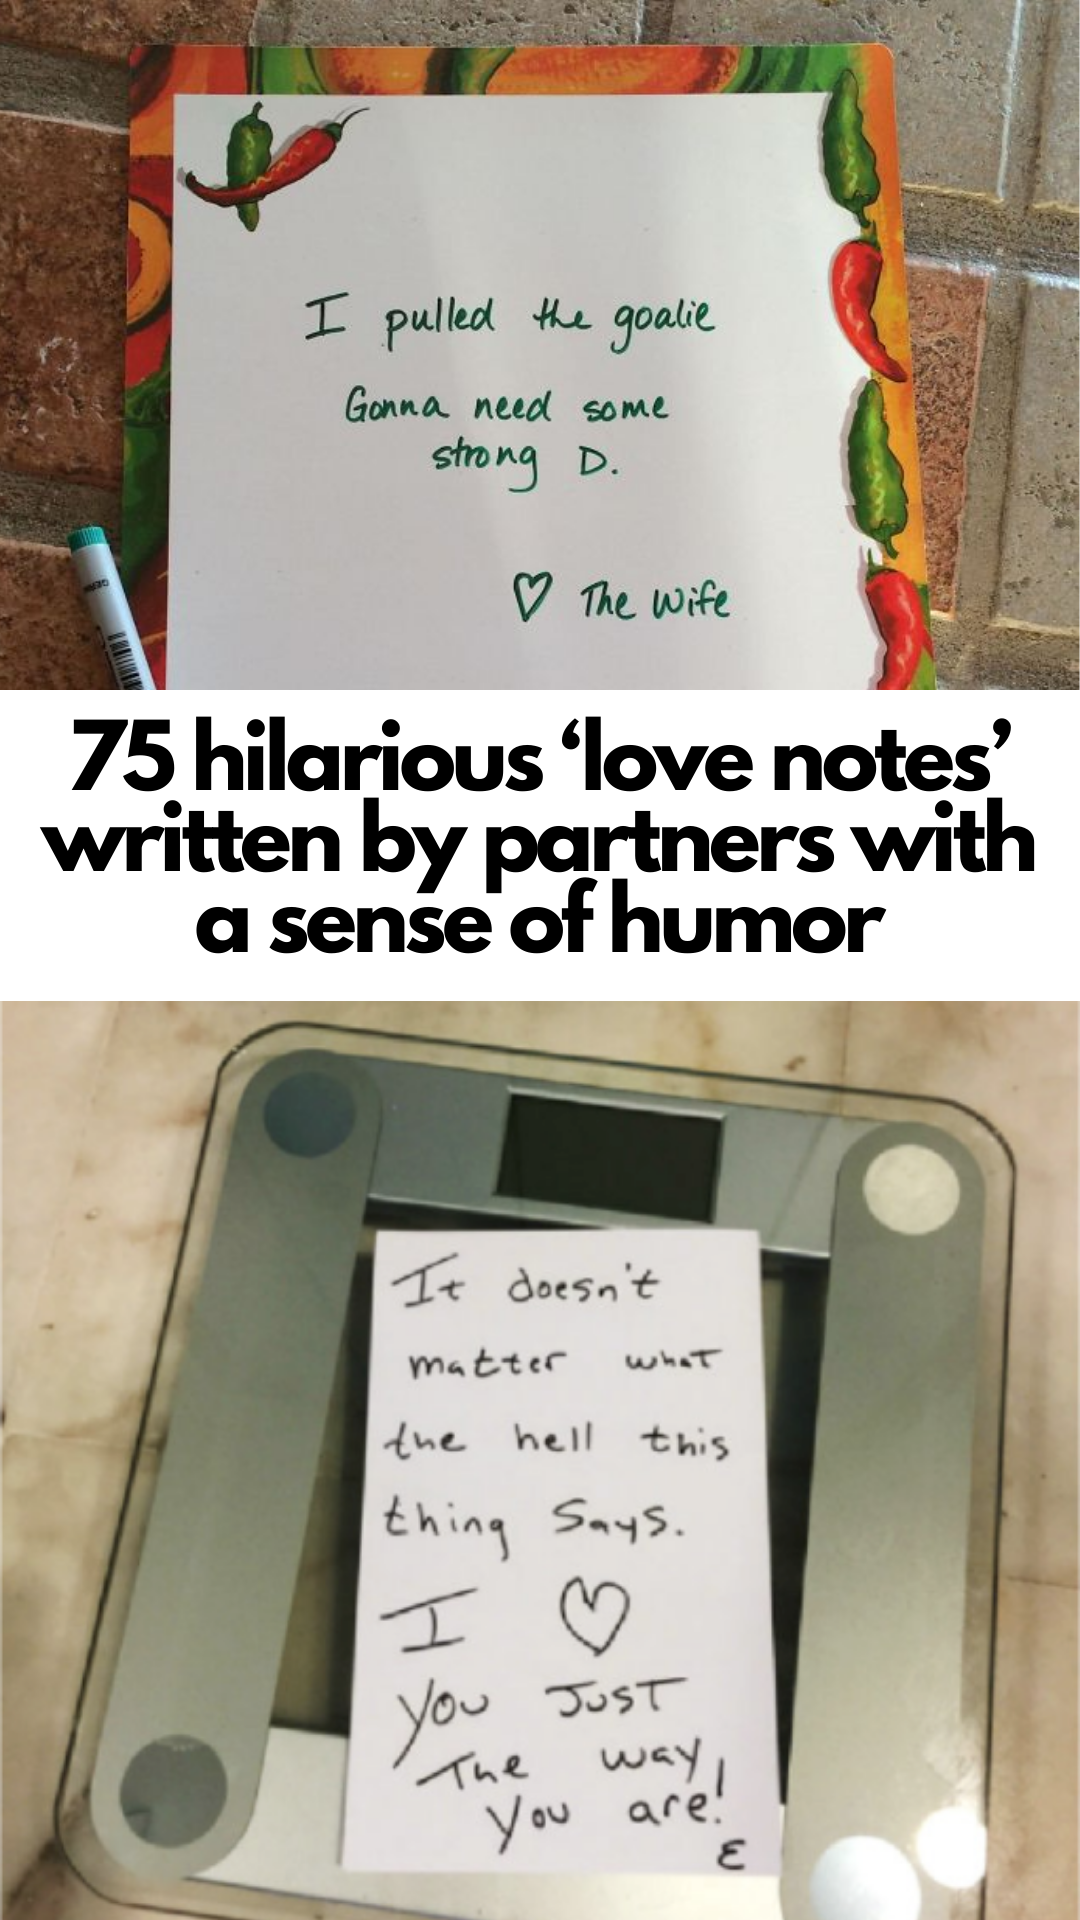 75 hilarious ‘love notes’ written by partners with a sense of humor